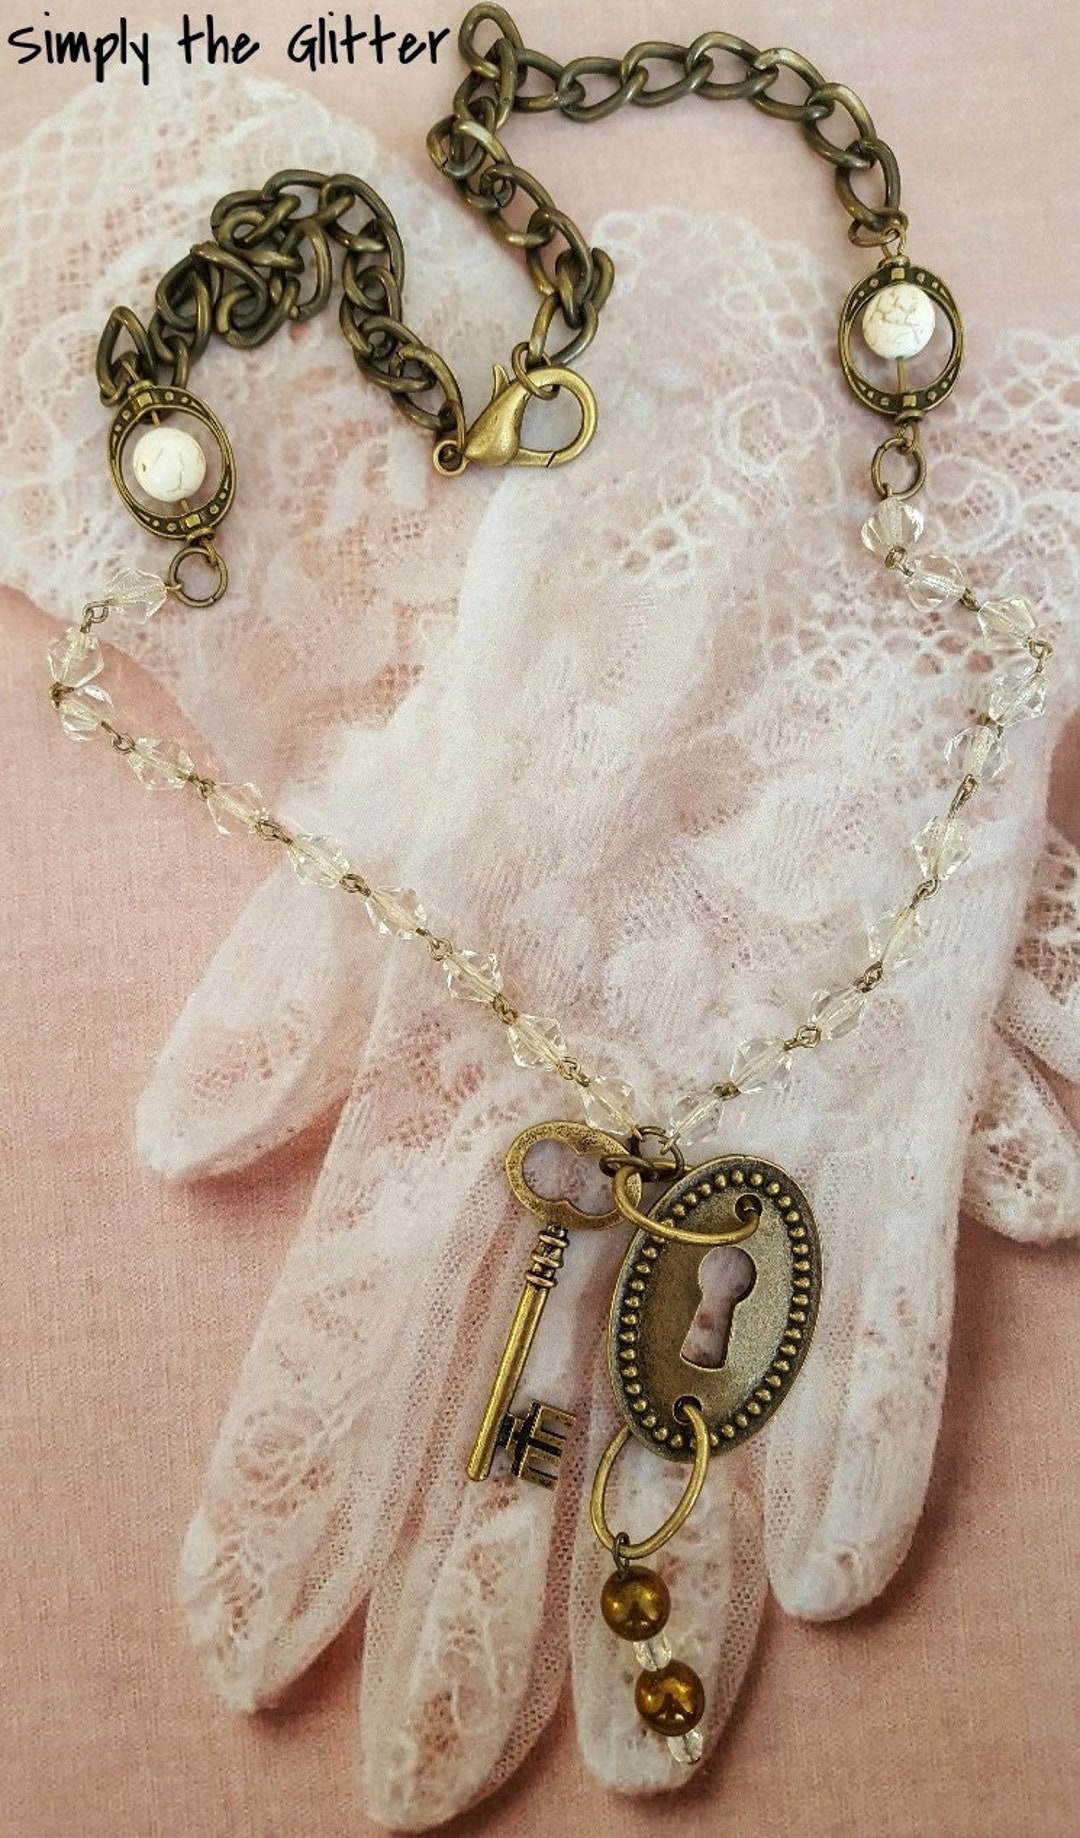 Brass Lock and Key Assemblage Necklace Mothers Day Gifts 